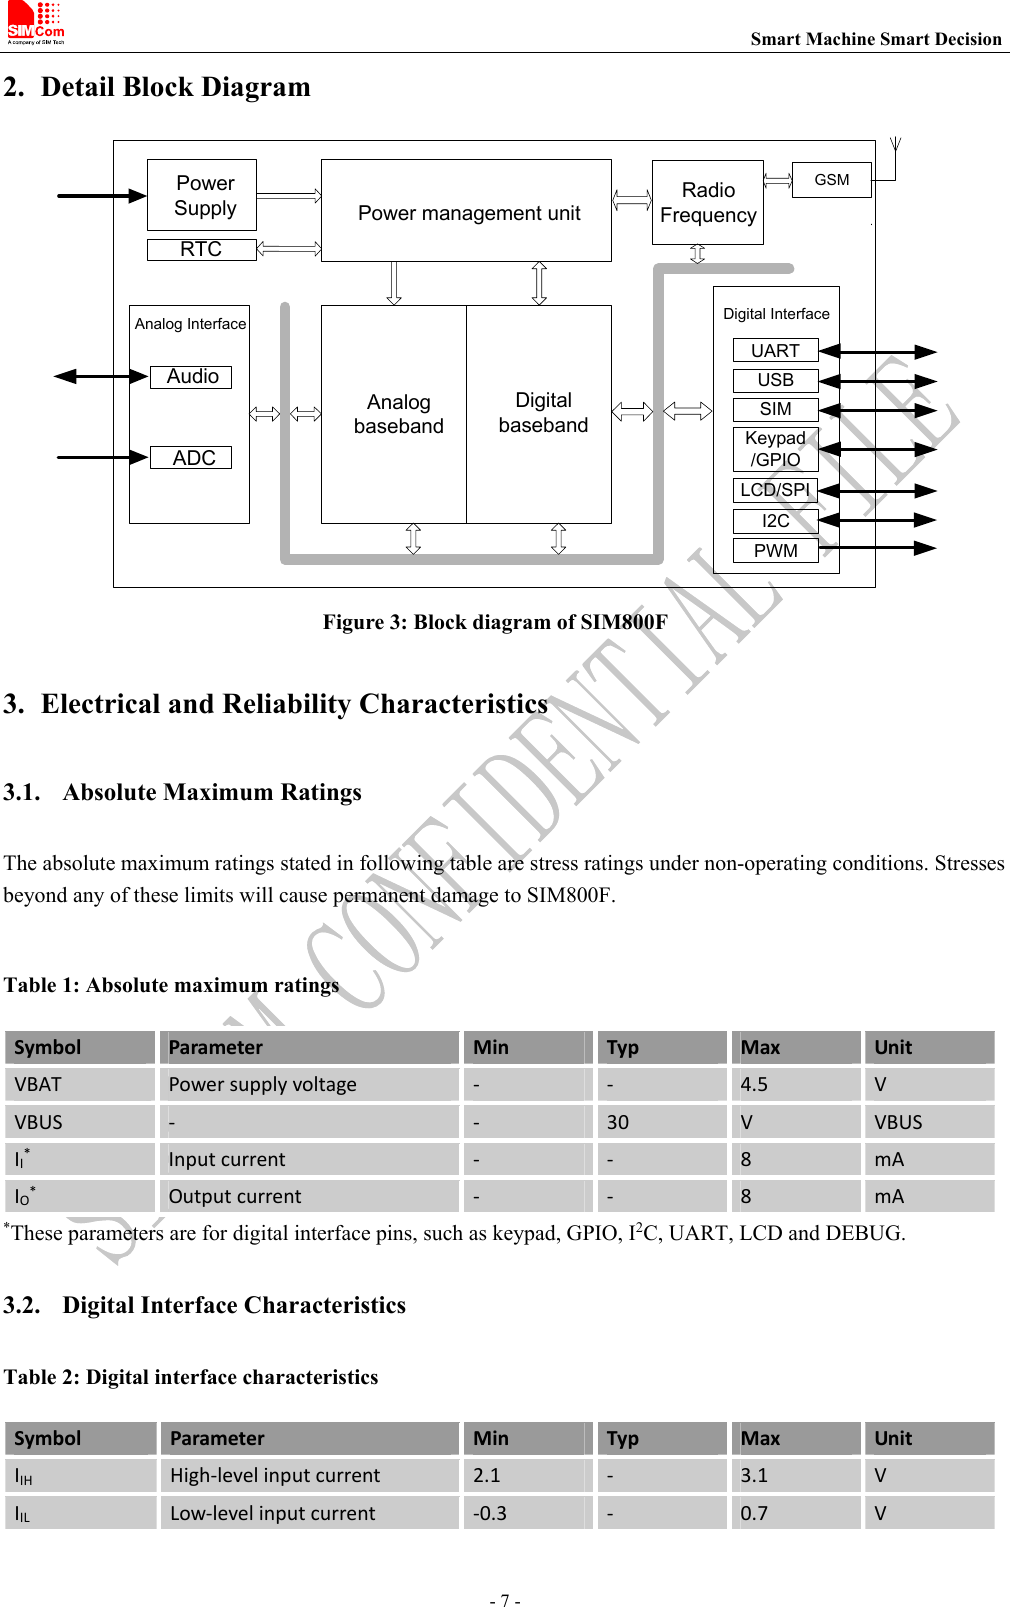                                                                          Smart Machine Smart Decision - 7 - 2. Detail Block Diagram AnalogbasebandDigitalbasebandPower management unitRadio FrequencyPower SupplyAnalog Interface Digital InterfaceRTC AudioADCGSMKeypad/GPIOUARTSIMUSBLCD/SPII2CPWM Figure 3: Block diagram of SIM800F  3. Electrical and Reliability Characteristics 3.1. Absolute Maximum Ratings The absolute maximum ratings stated in following table are stress ratings under non-operating conditions. Stresses beyond any of these limits will cause permanent damage to SIM800F.  Table 1: Absolute maximum ratings Symbol Parameter Min Typ Max UnitVBAT Powersupplyvoltage ‐ ‐ 4.5 VVBUS ‐ ‐ 30 V VBUSII*Inputcurrent ‐ ‐ 8 mAIO*Outputcurrent ‐ ‐ 8 mA*These parameters are for digital interface pins, such as keypad, GPIO, I2C, UART, LCD and DEBUG. 3.2. Digital Interface Characteristics Table 2: Digital interface characteristicsSymbol Parameter Min Typ Max UnitIIHHigh‐levelinputcurrent 2.1 ‐ 3.1 VIILLow‐levelinputcurrent ‐0.3 ‐ 0.7 V